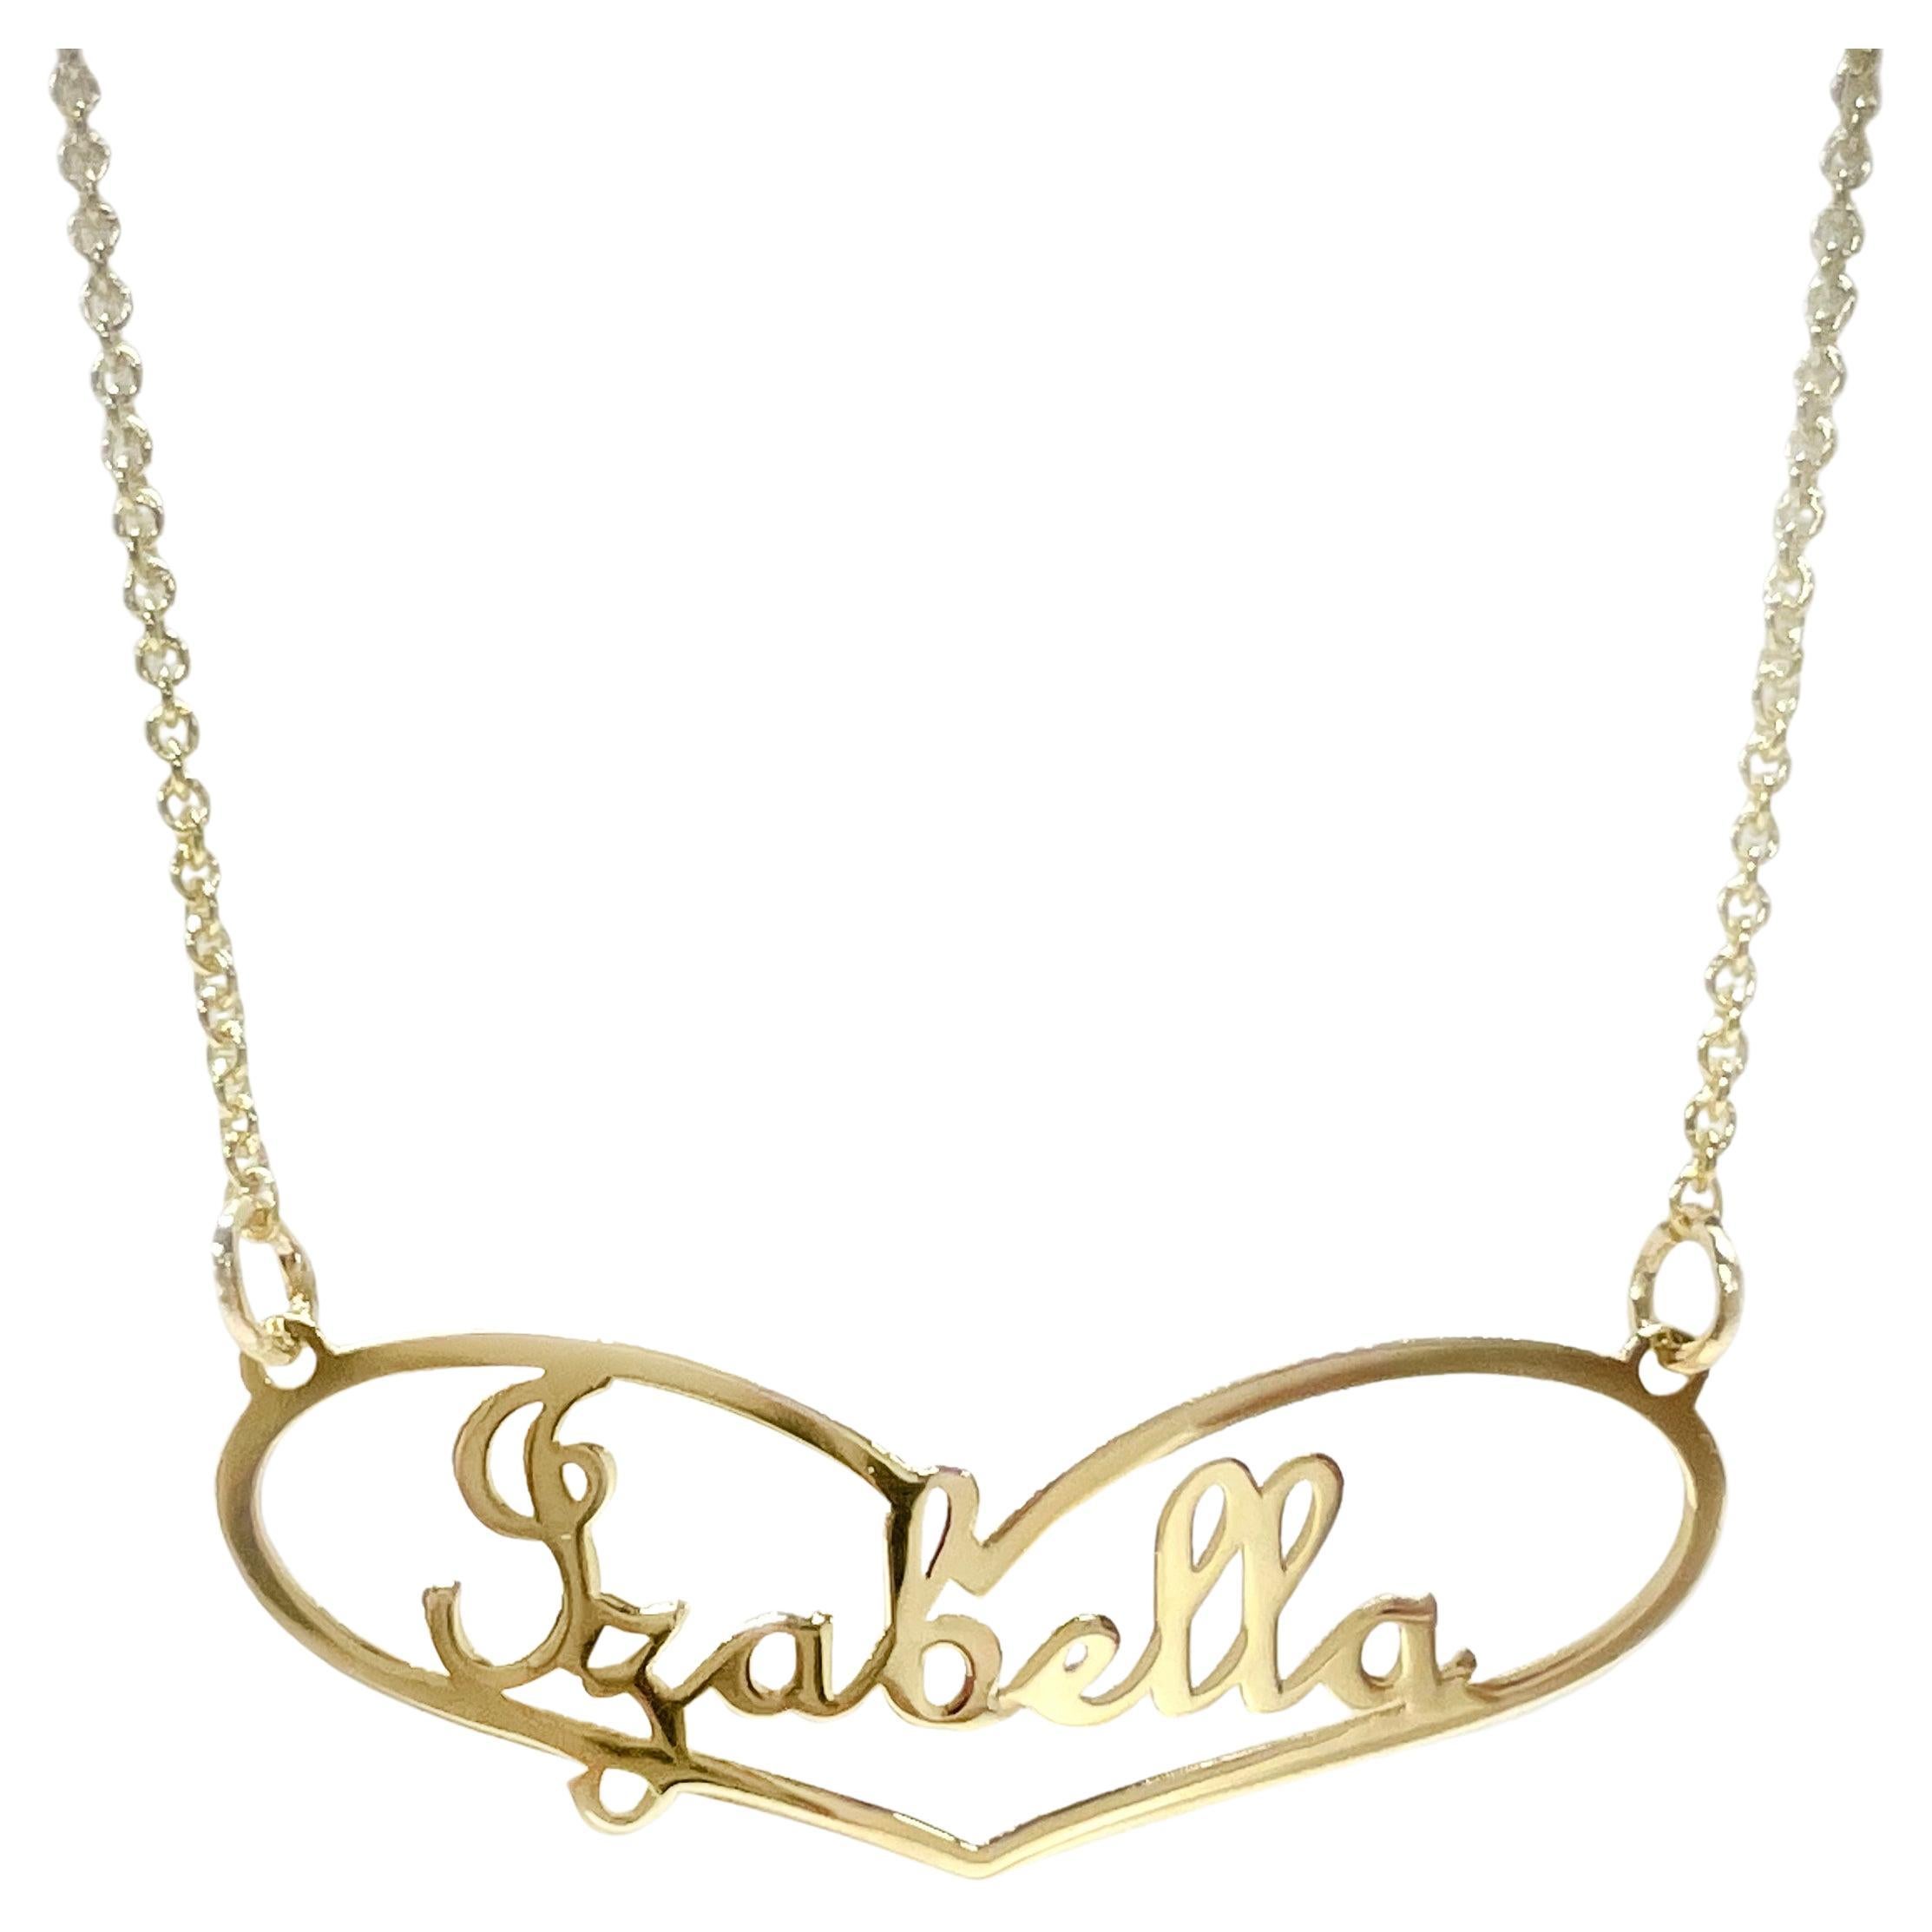 Yellow Gold Izabella Name Pendant Necklace For Sale